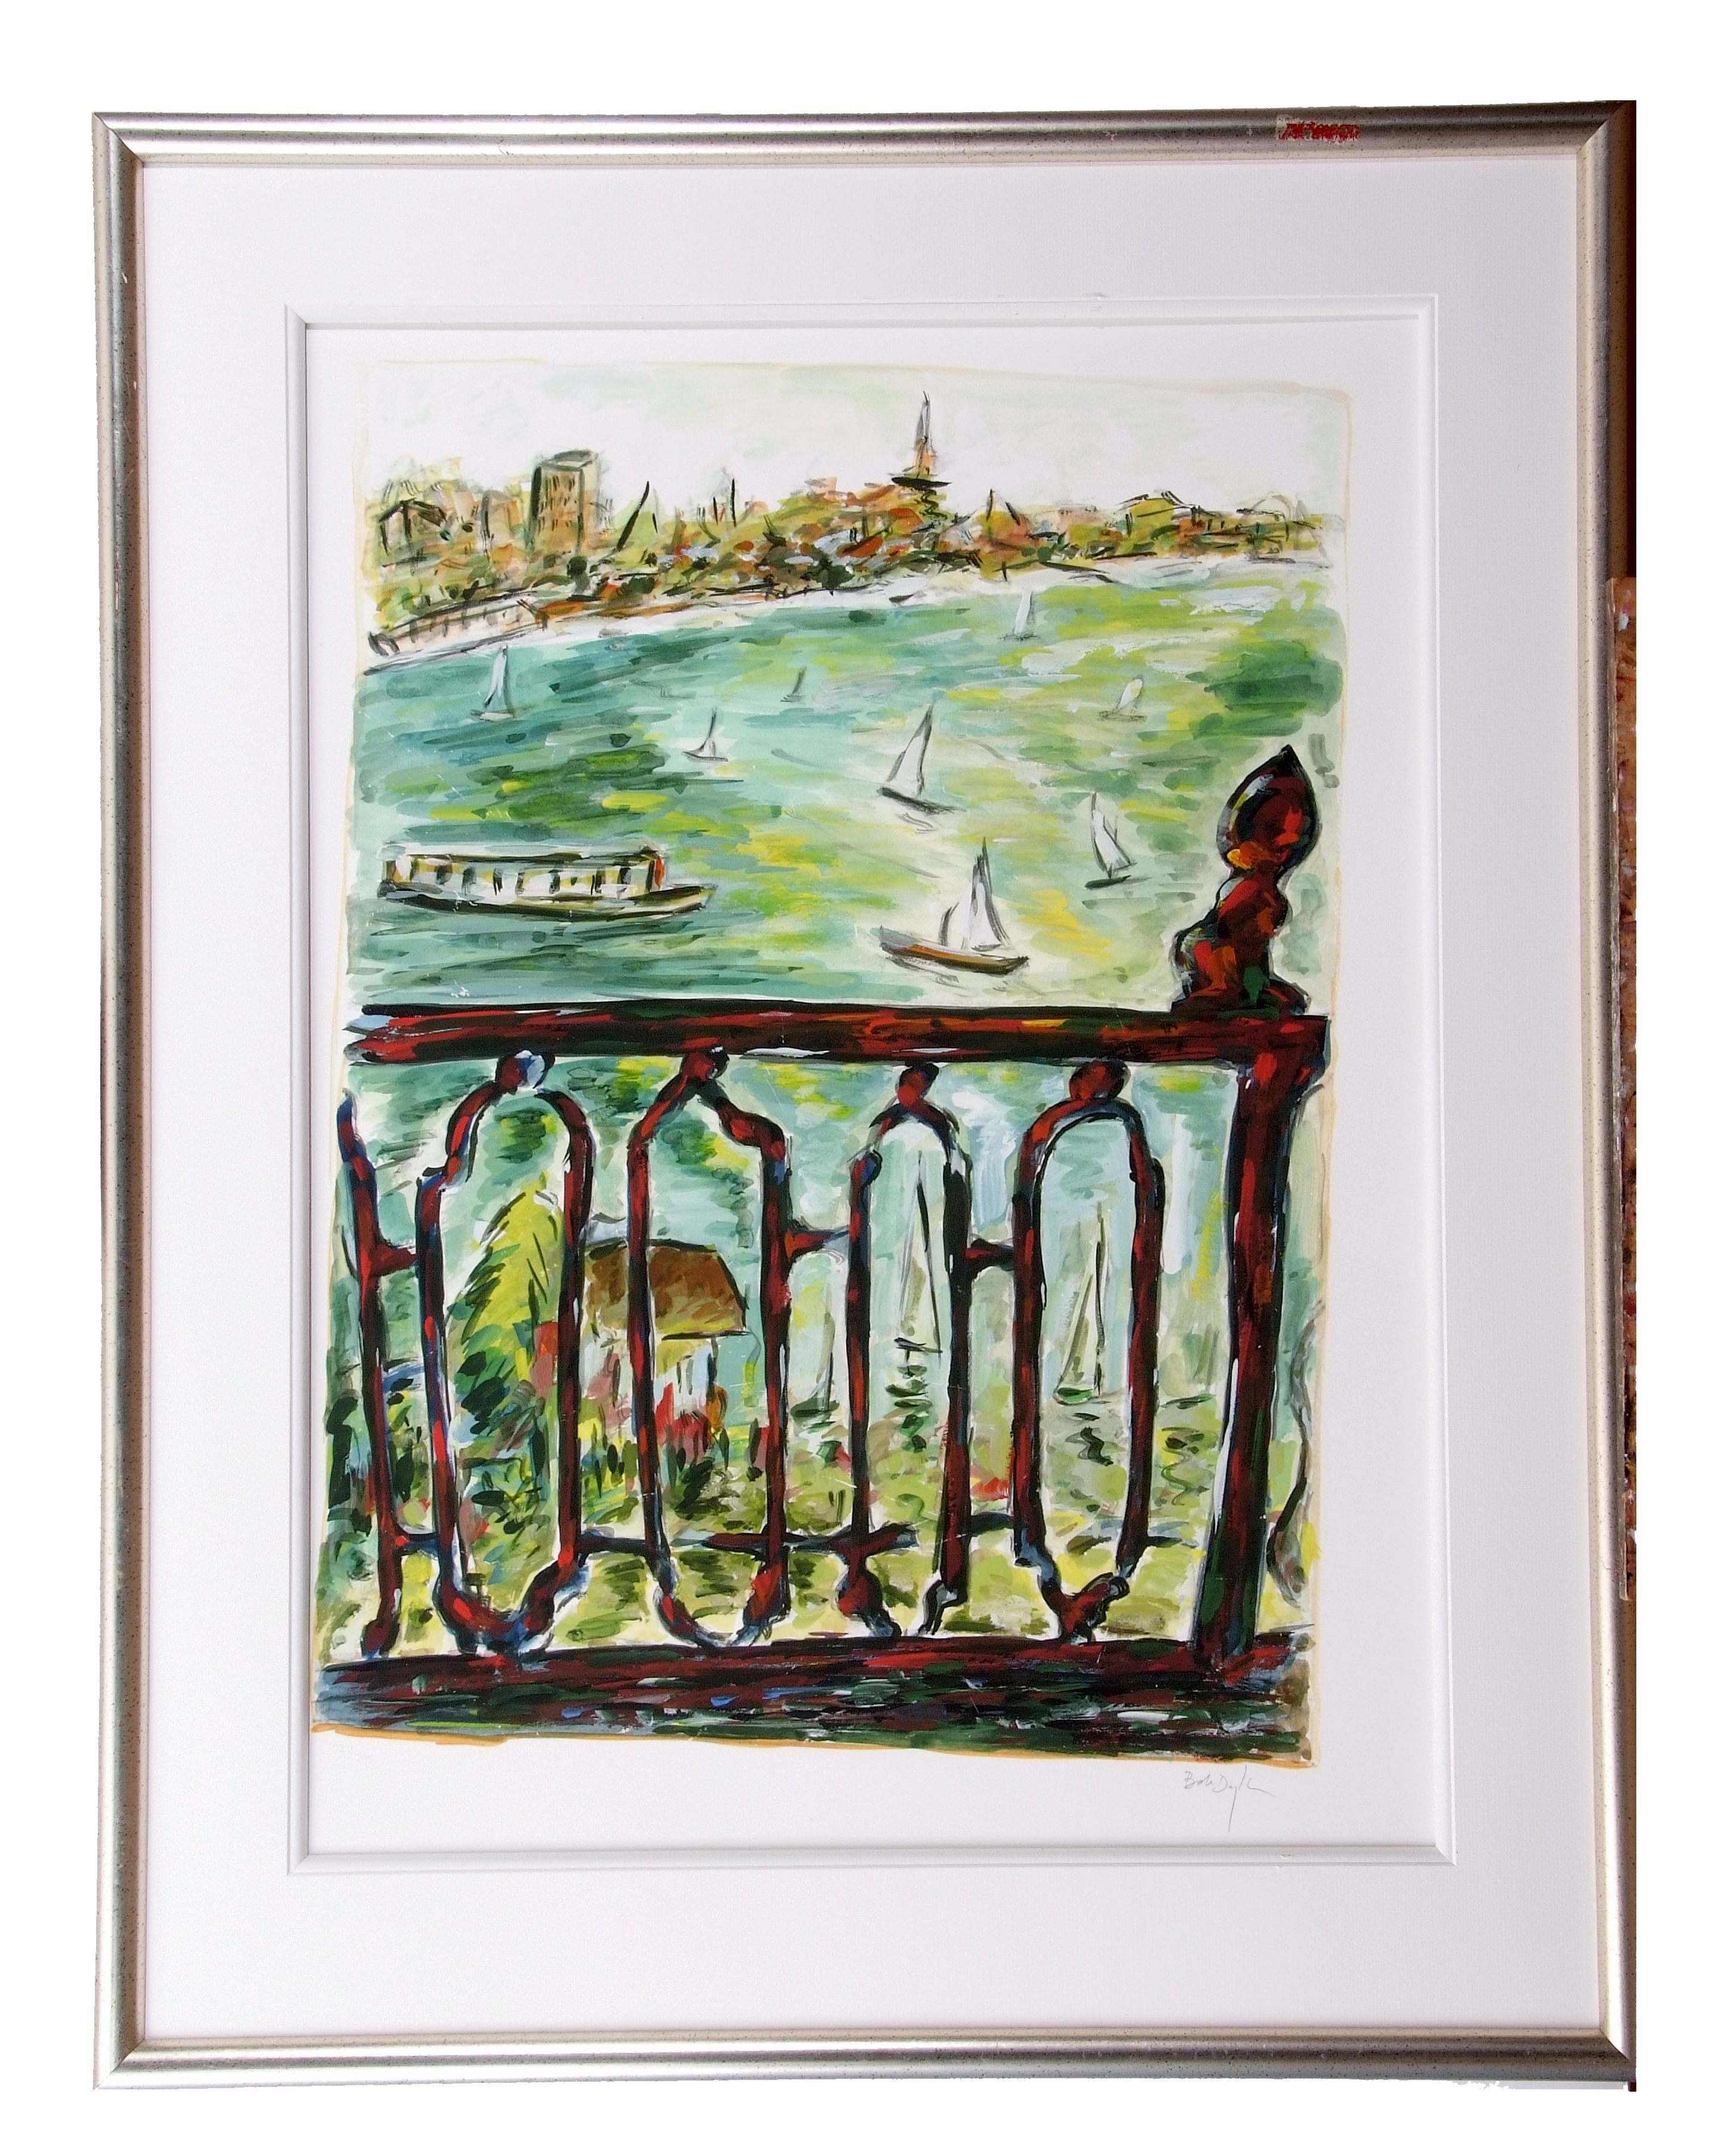 AR Bob Dylan (born 1941) "Vista from balcony" giclee print, signed and numbered 112/295 in pencil - Image 2 of 2